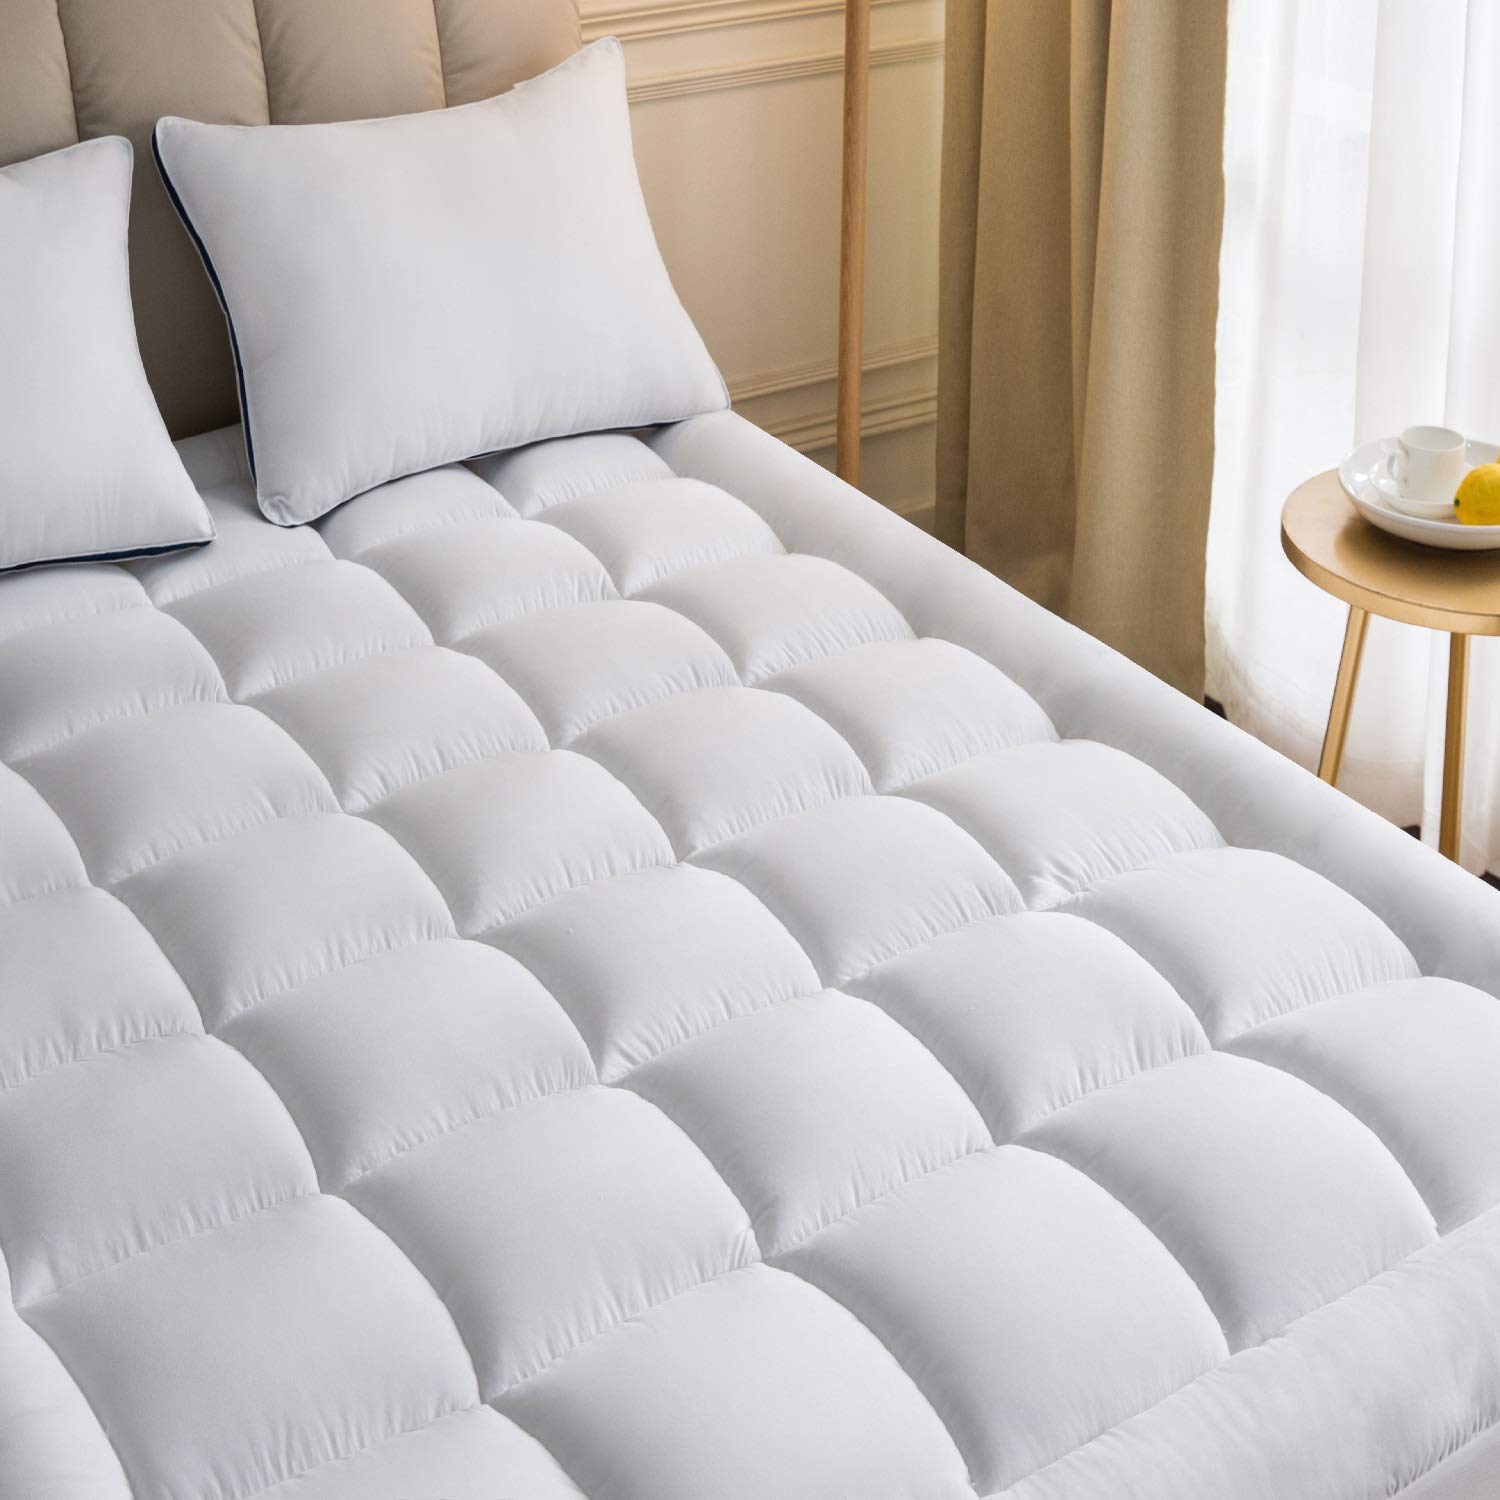 8 Best Topper for Air Mattress You Can Buy in 2020